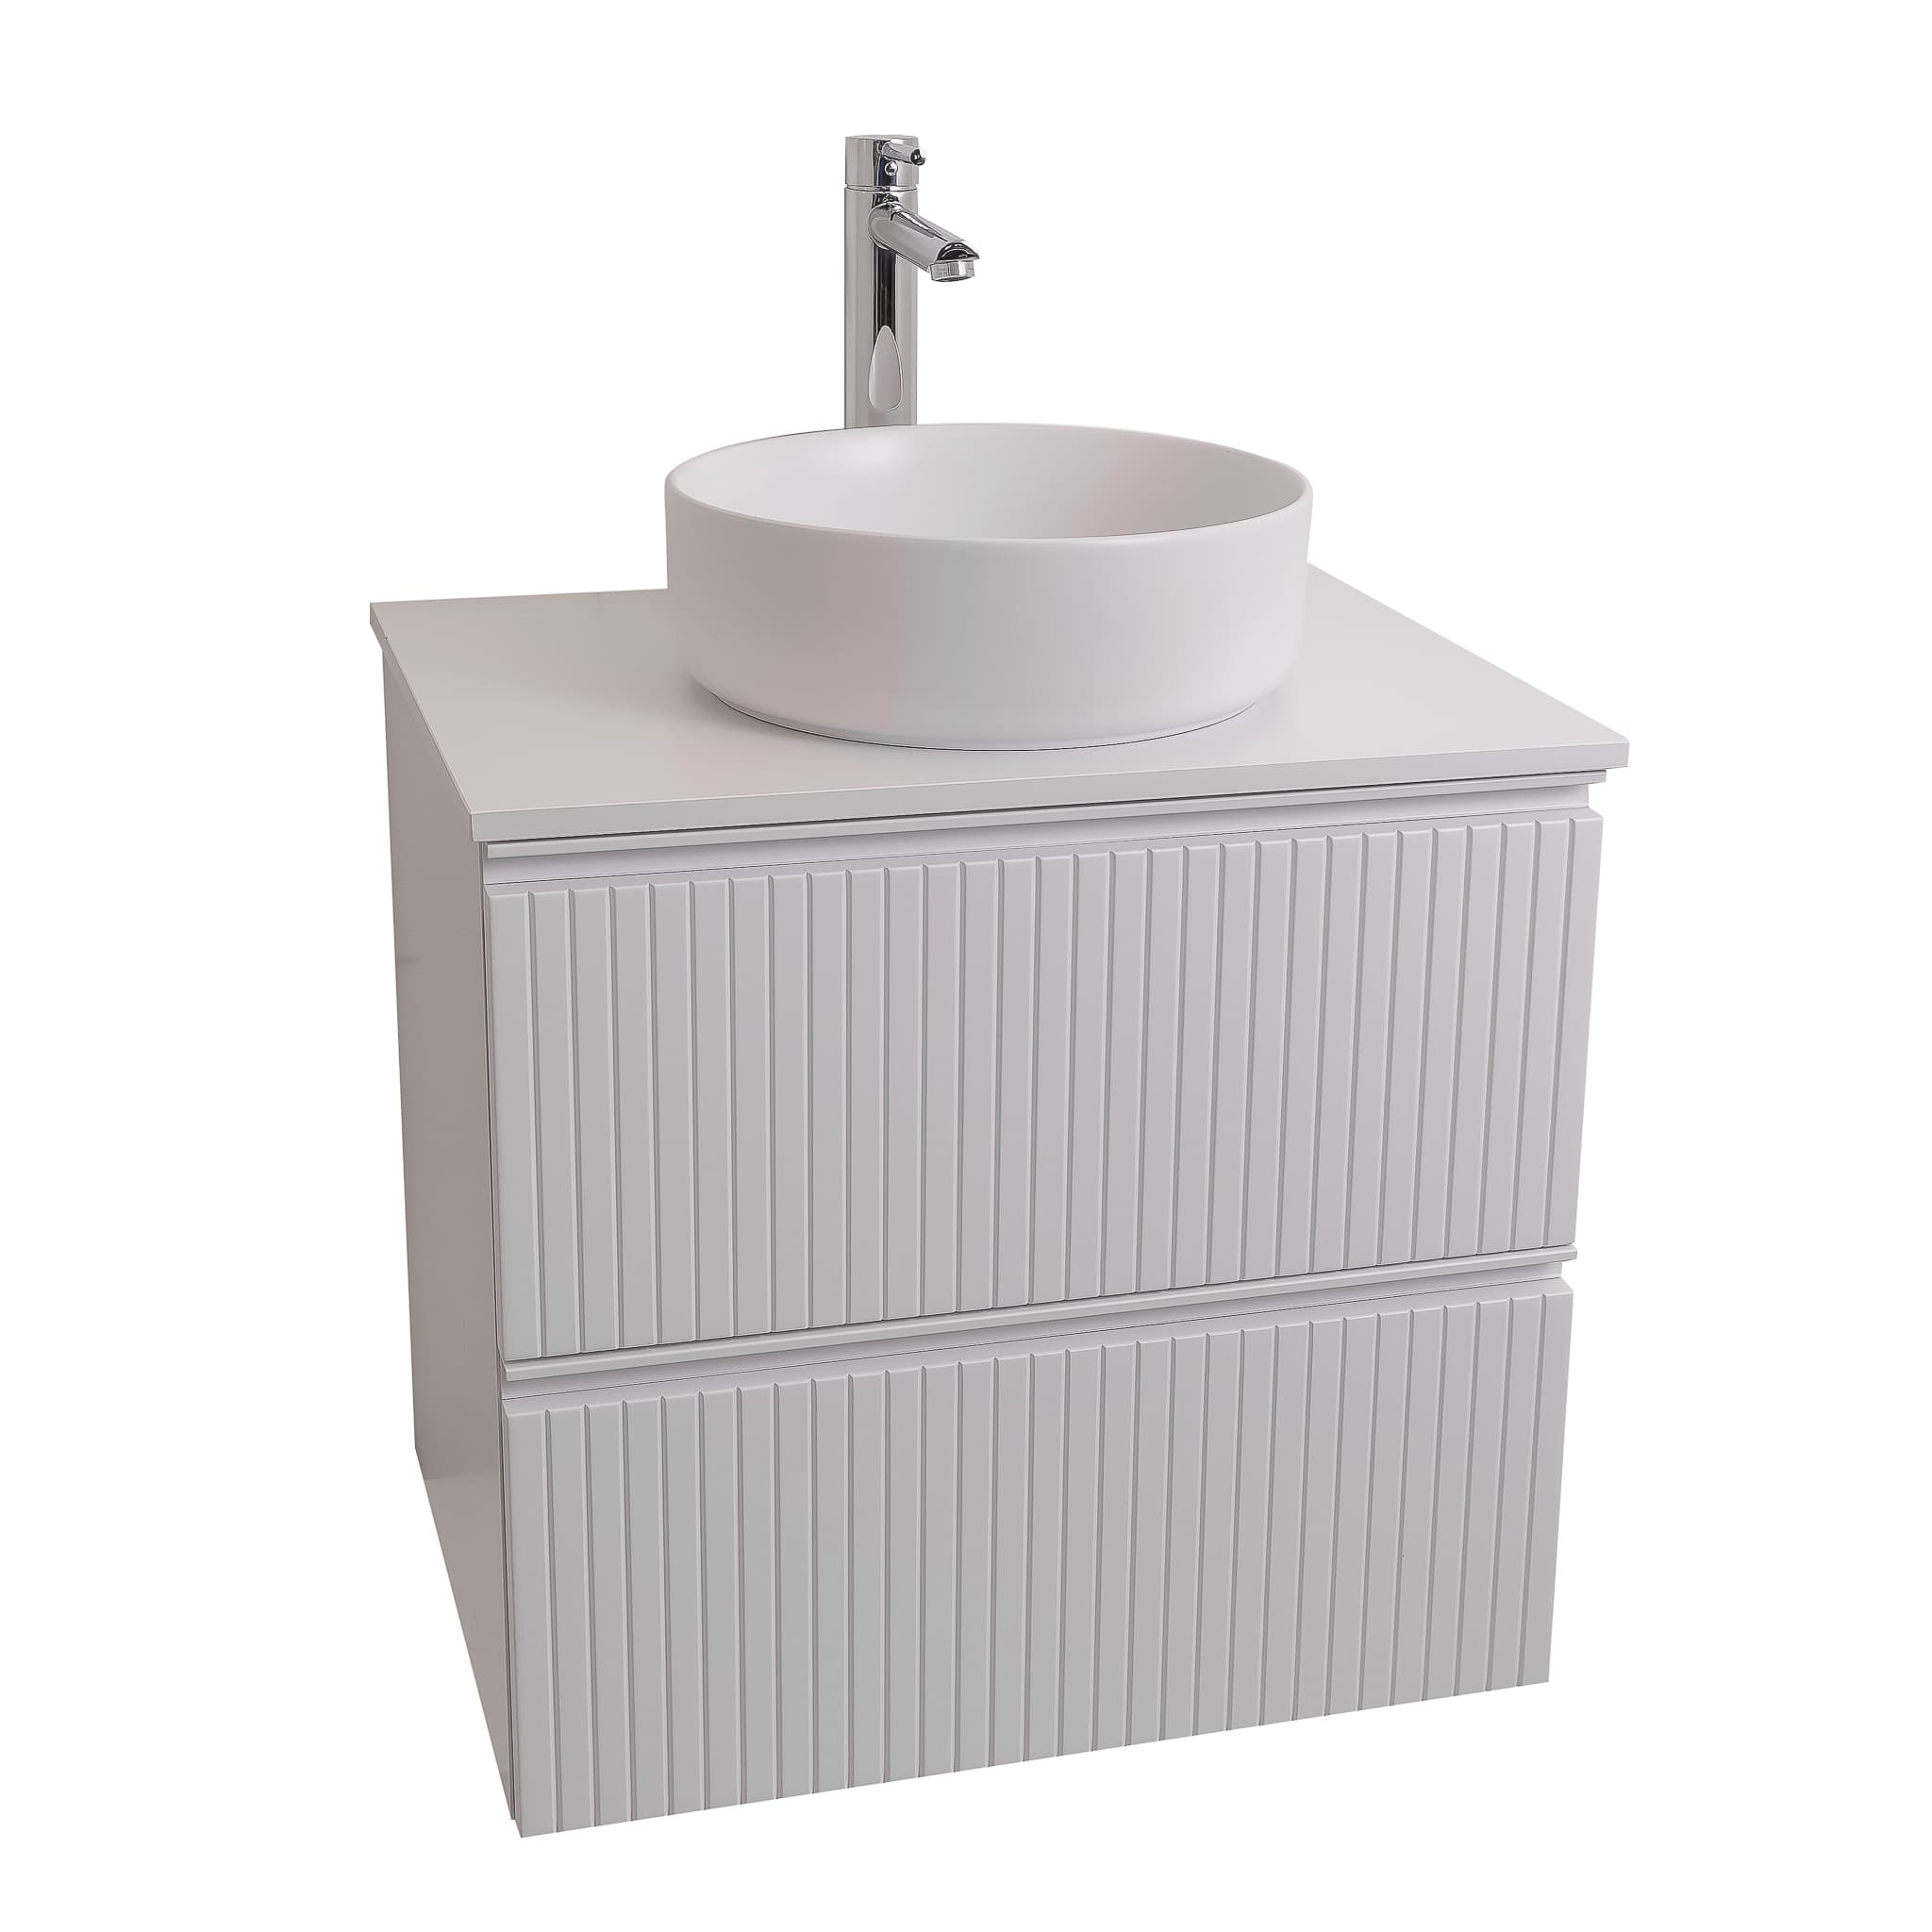 Ares 23.5 Matte White Cabinet, Ares White Top And Ares White Ceramic Basin, Wall Mounted Modern Vanity Set